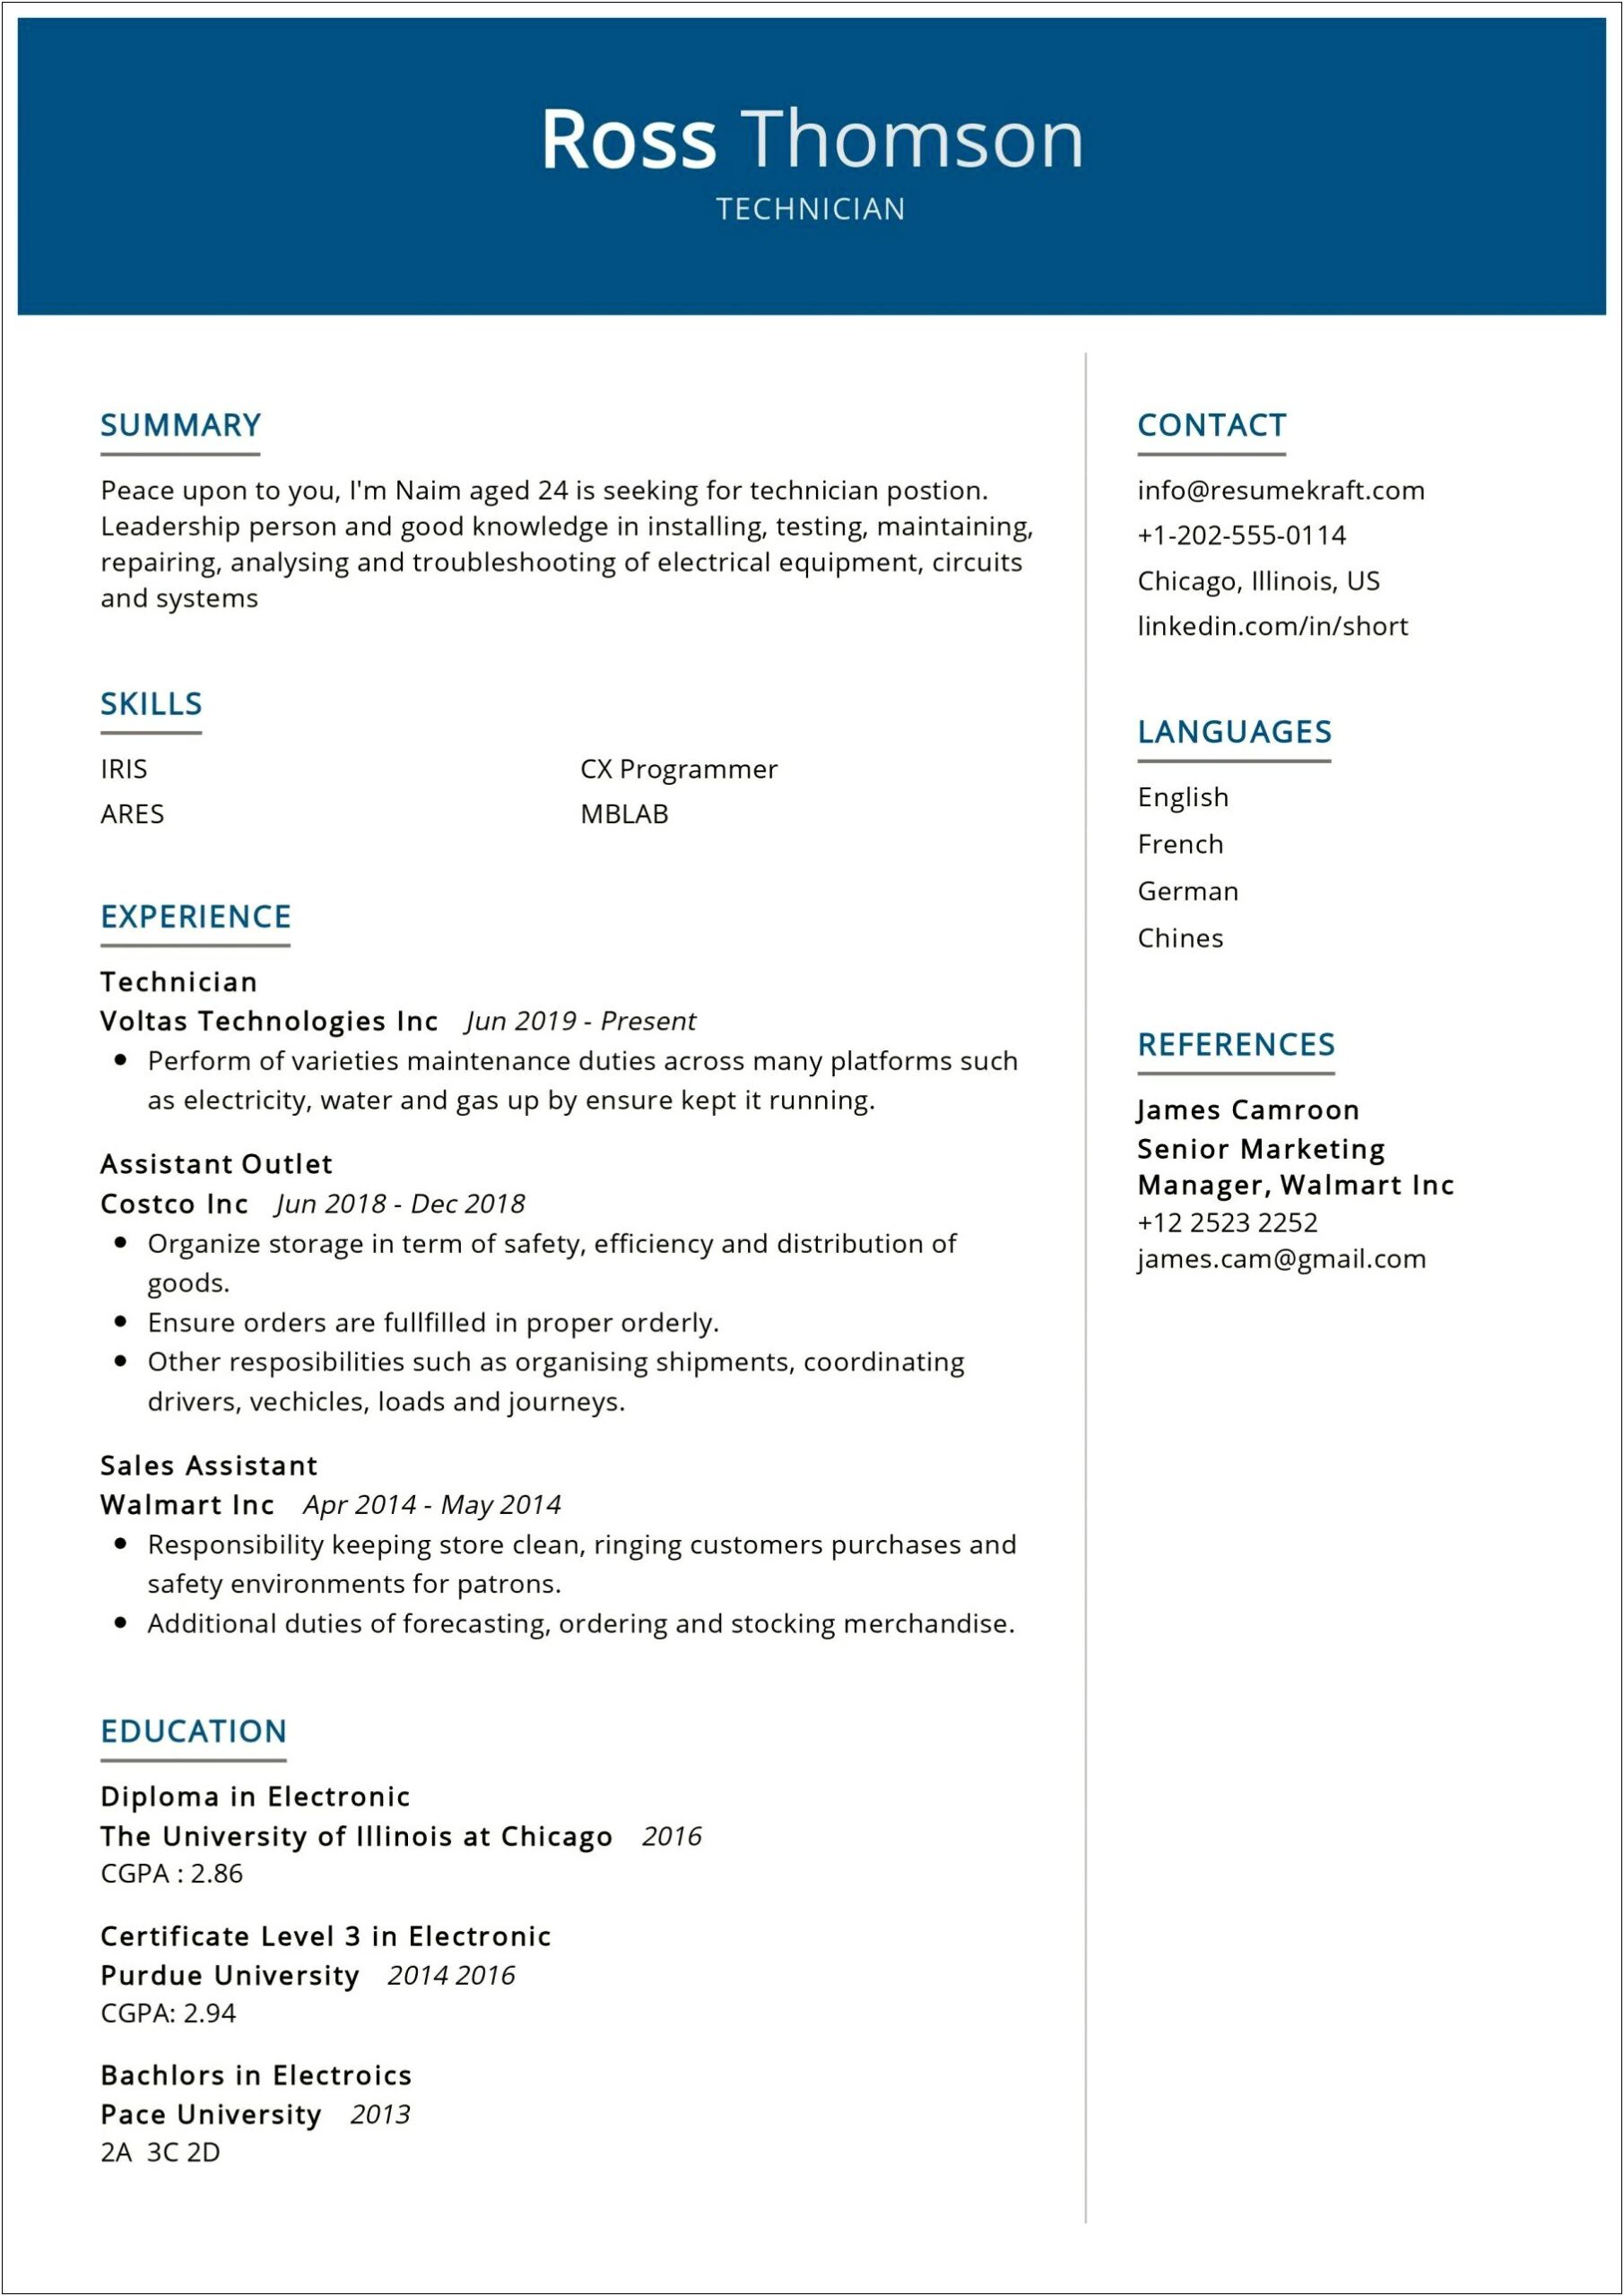 Resume Objective Examples For Technicians